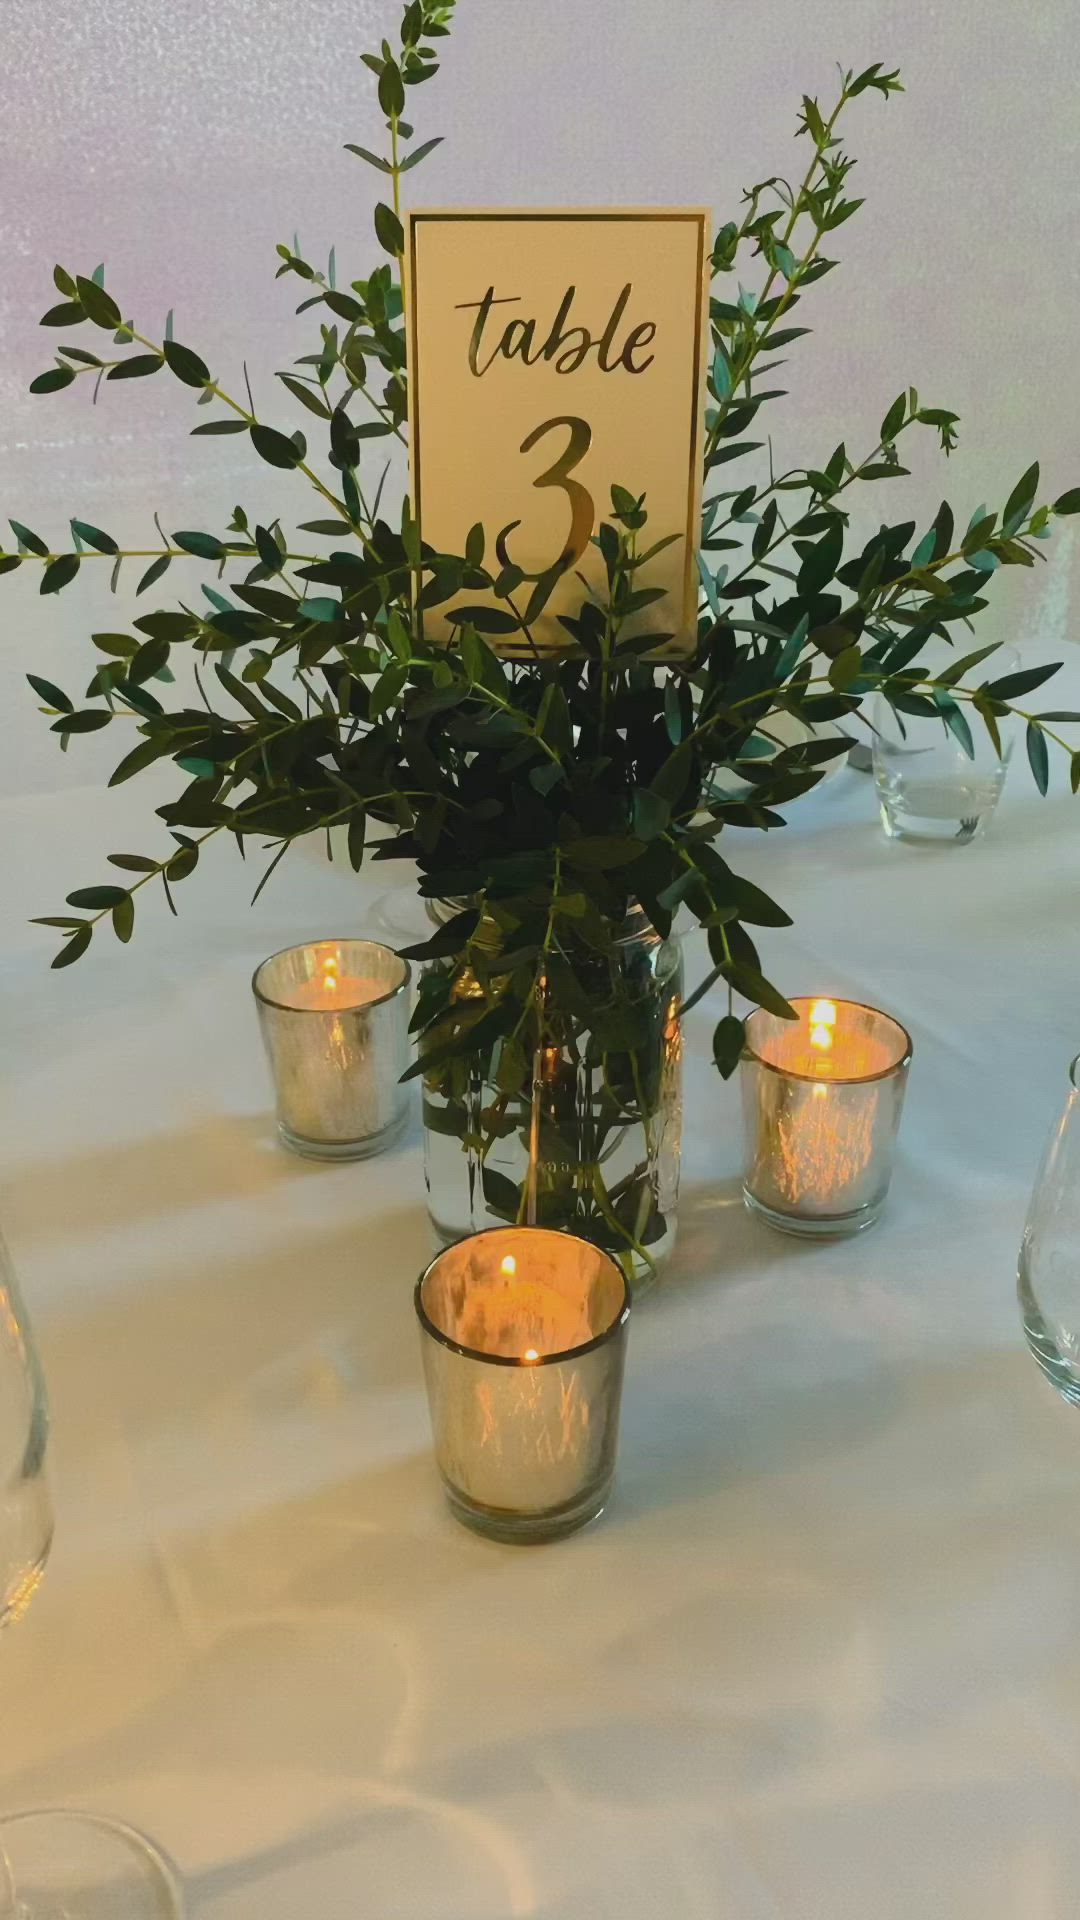 This may contain: the table is set with candles and greenery in glass vases, which are labeled table 2